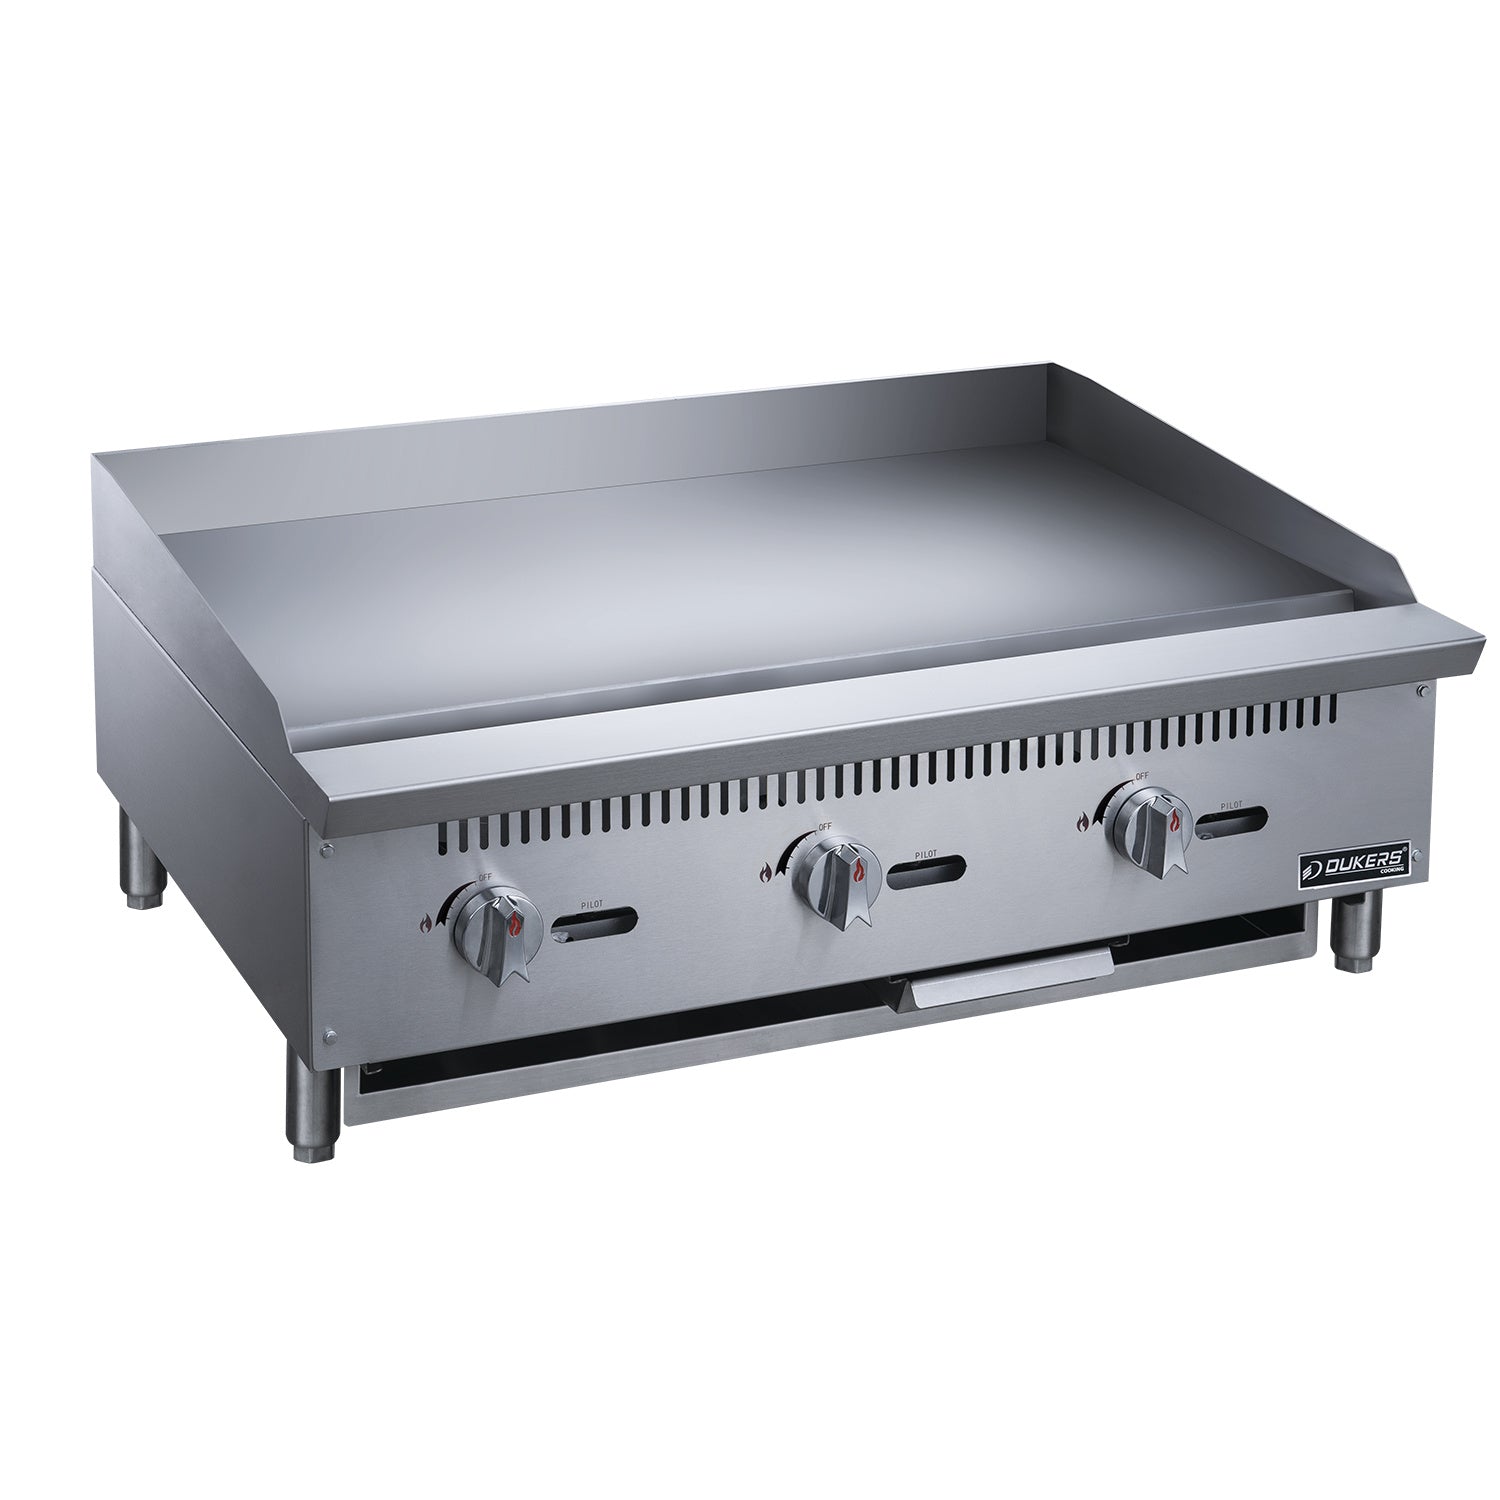 3-Burner Commercial Griddle in Stainless Steel with 4 legs with two control knobs and BTU burners on a white background.